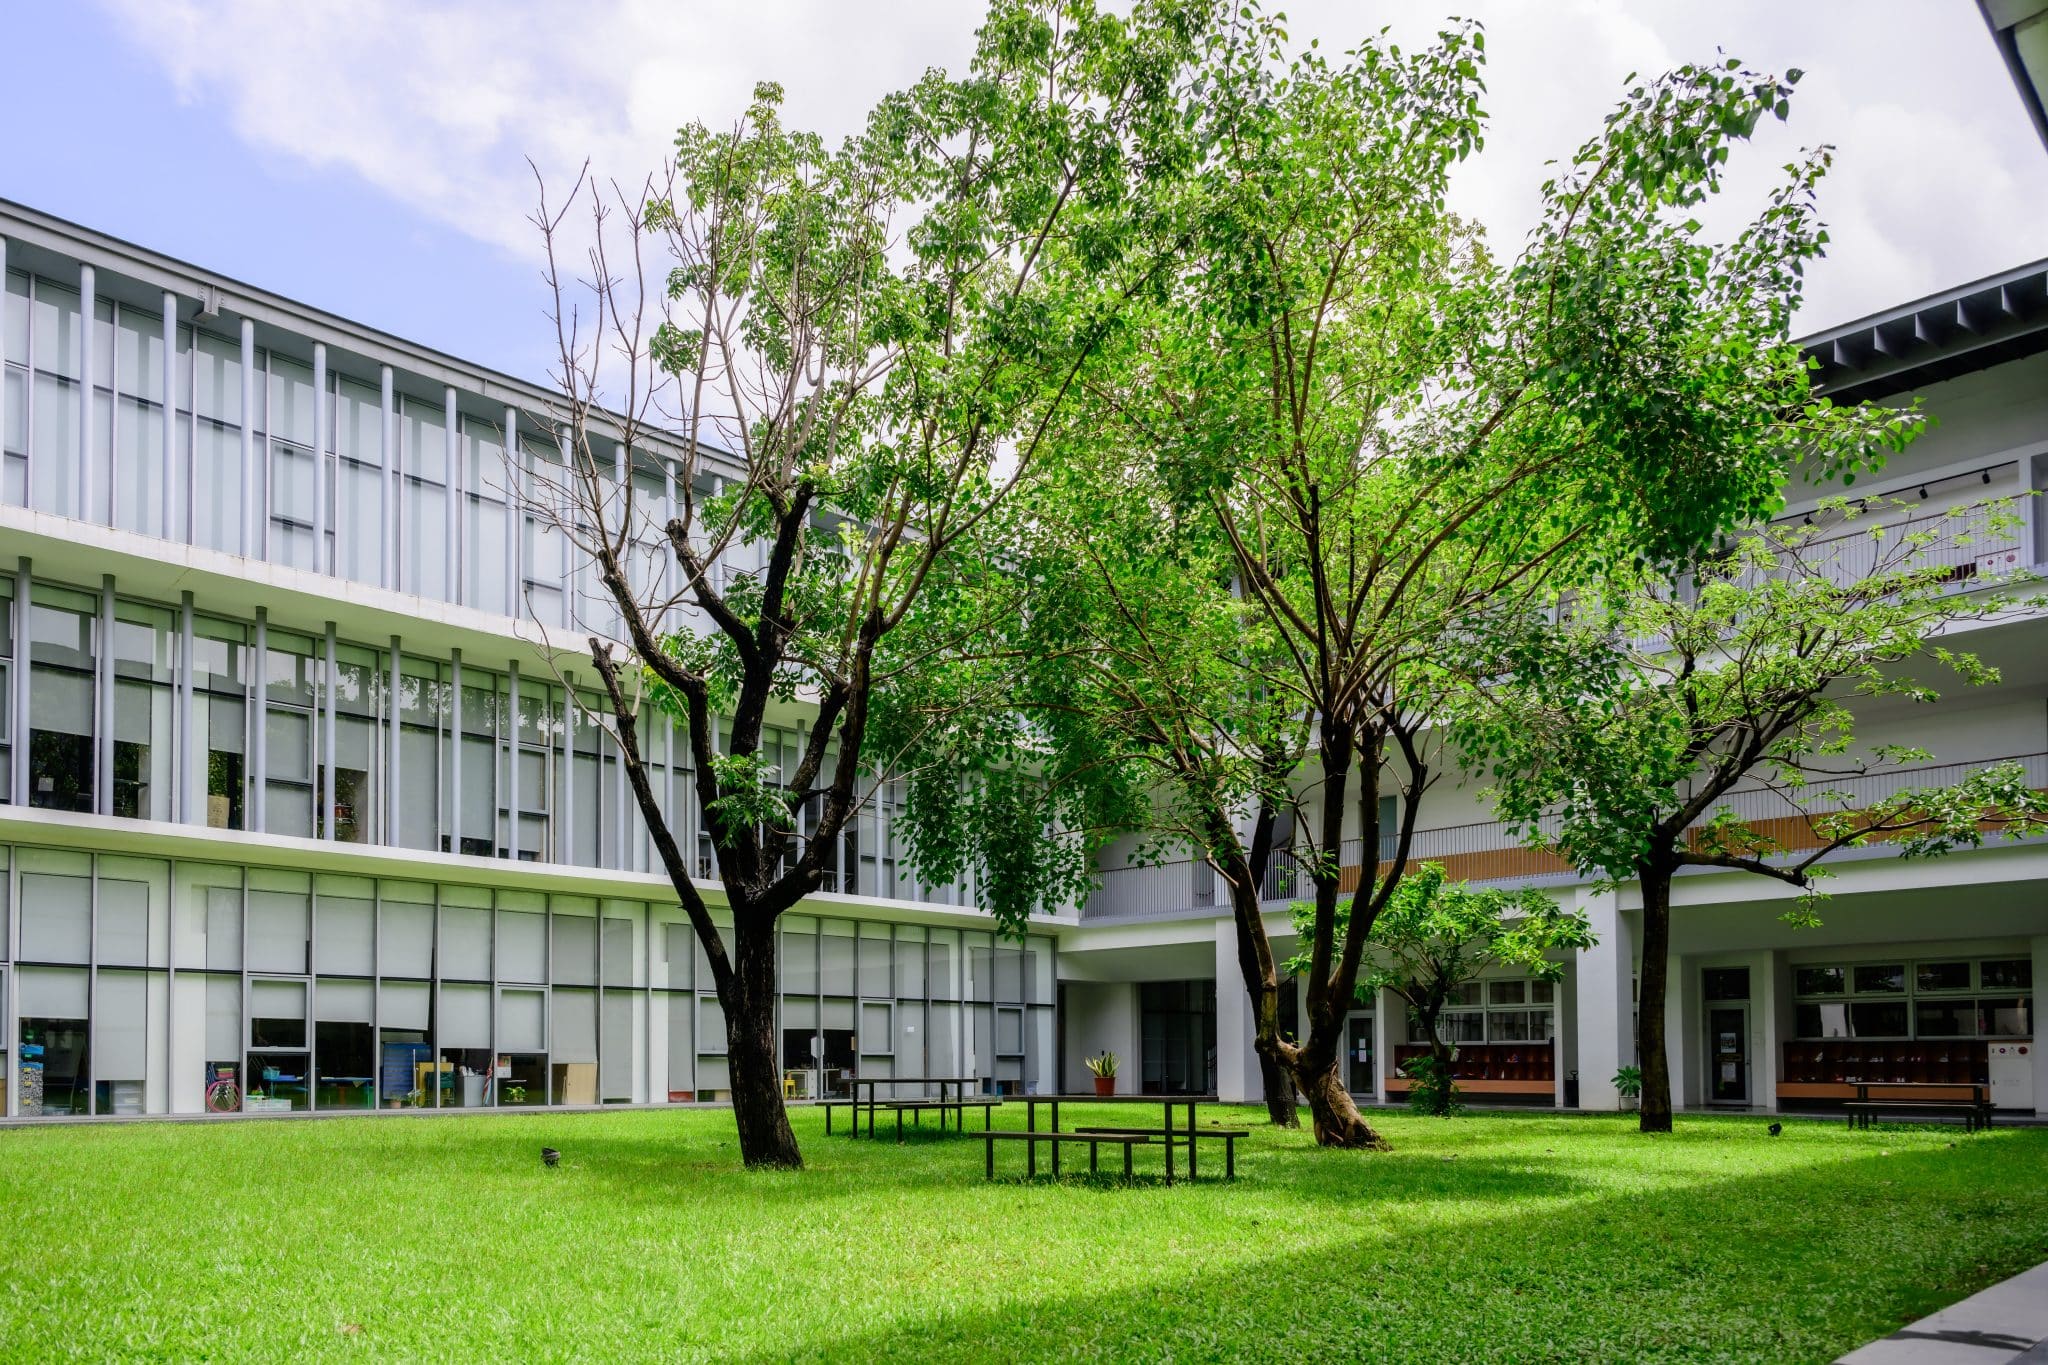 The school architecture was designed with the local culture in mind. In Taiwanese tradition, courtyards are a place for people to gather, connect, and communicate. 